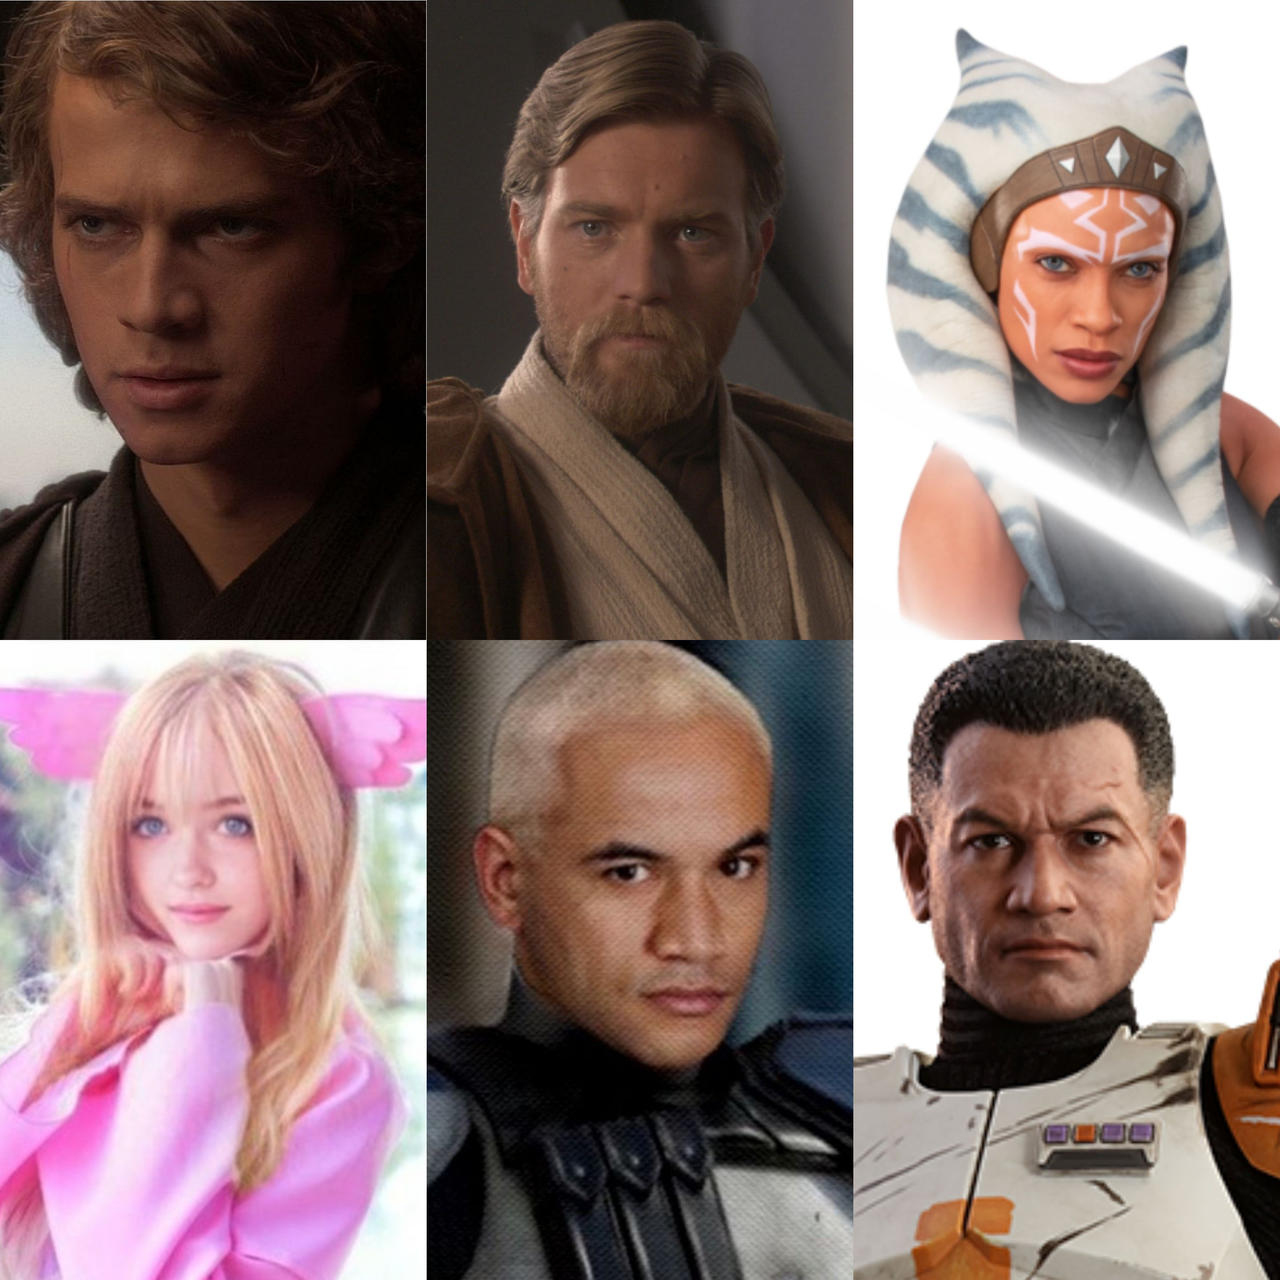 Star Wars and Fairy Tail: Macao arc Fan Casting on myCast